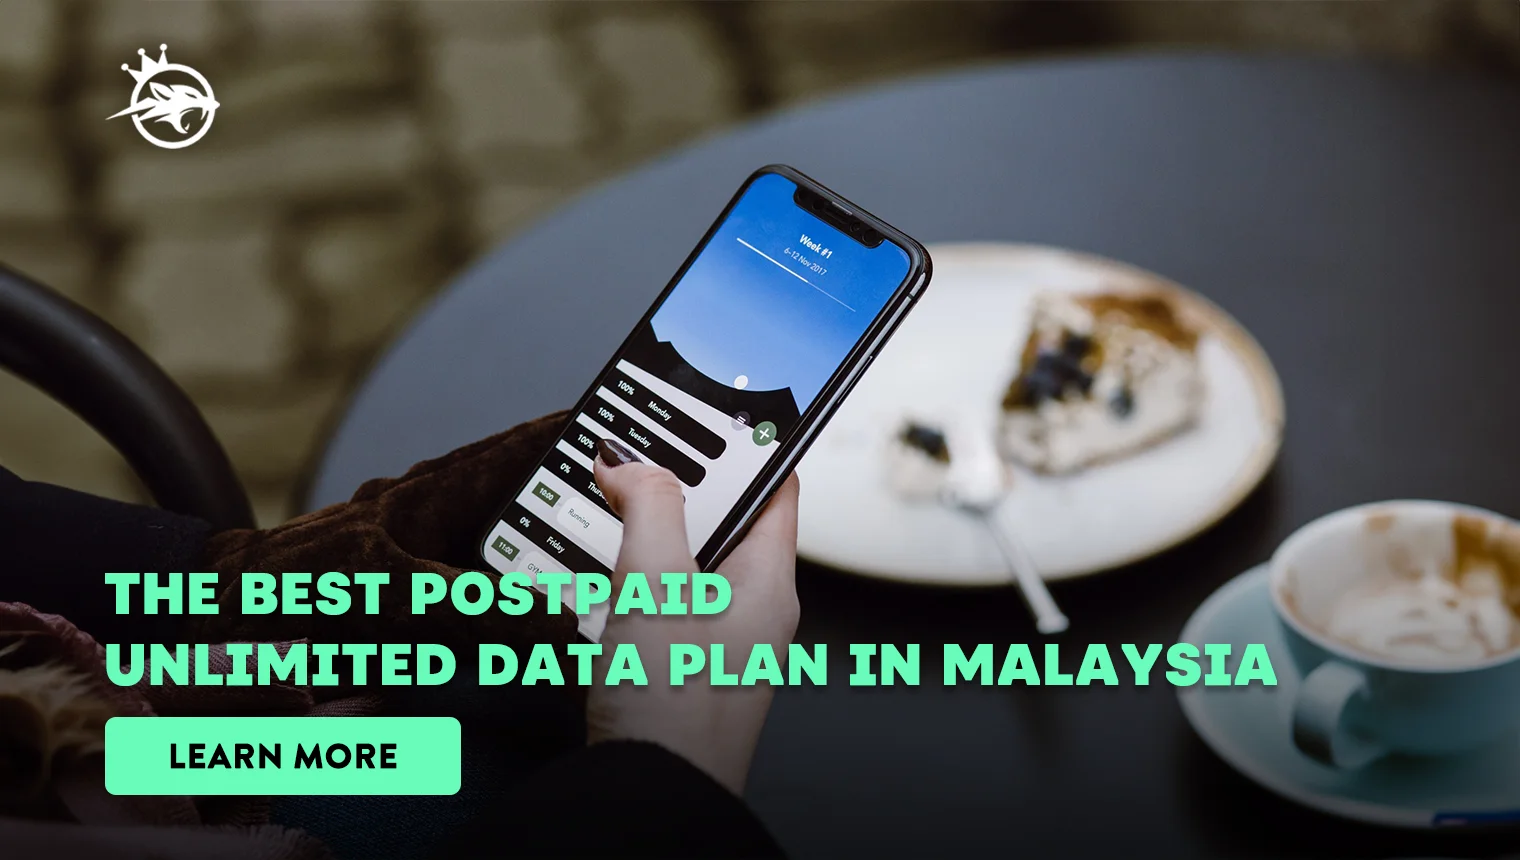 The Best Postpaid Unlimited Data Plan in Malaysia